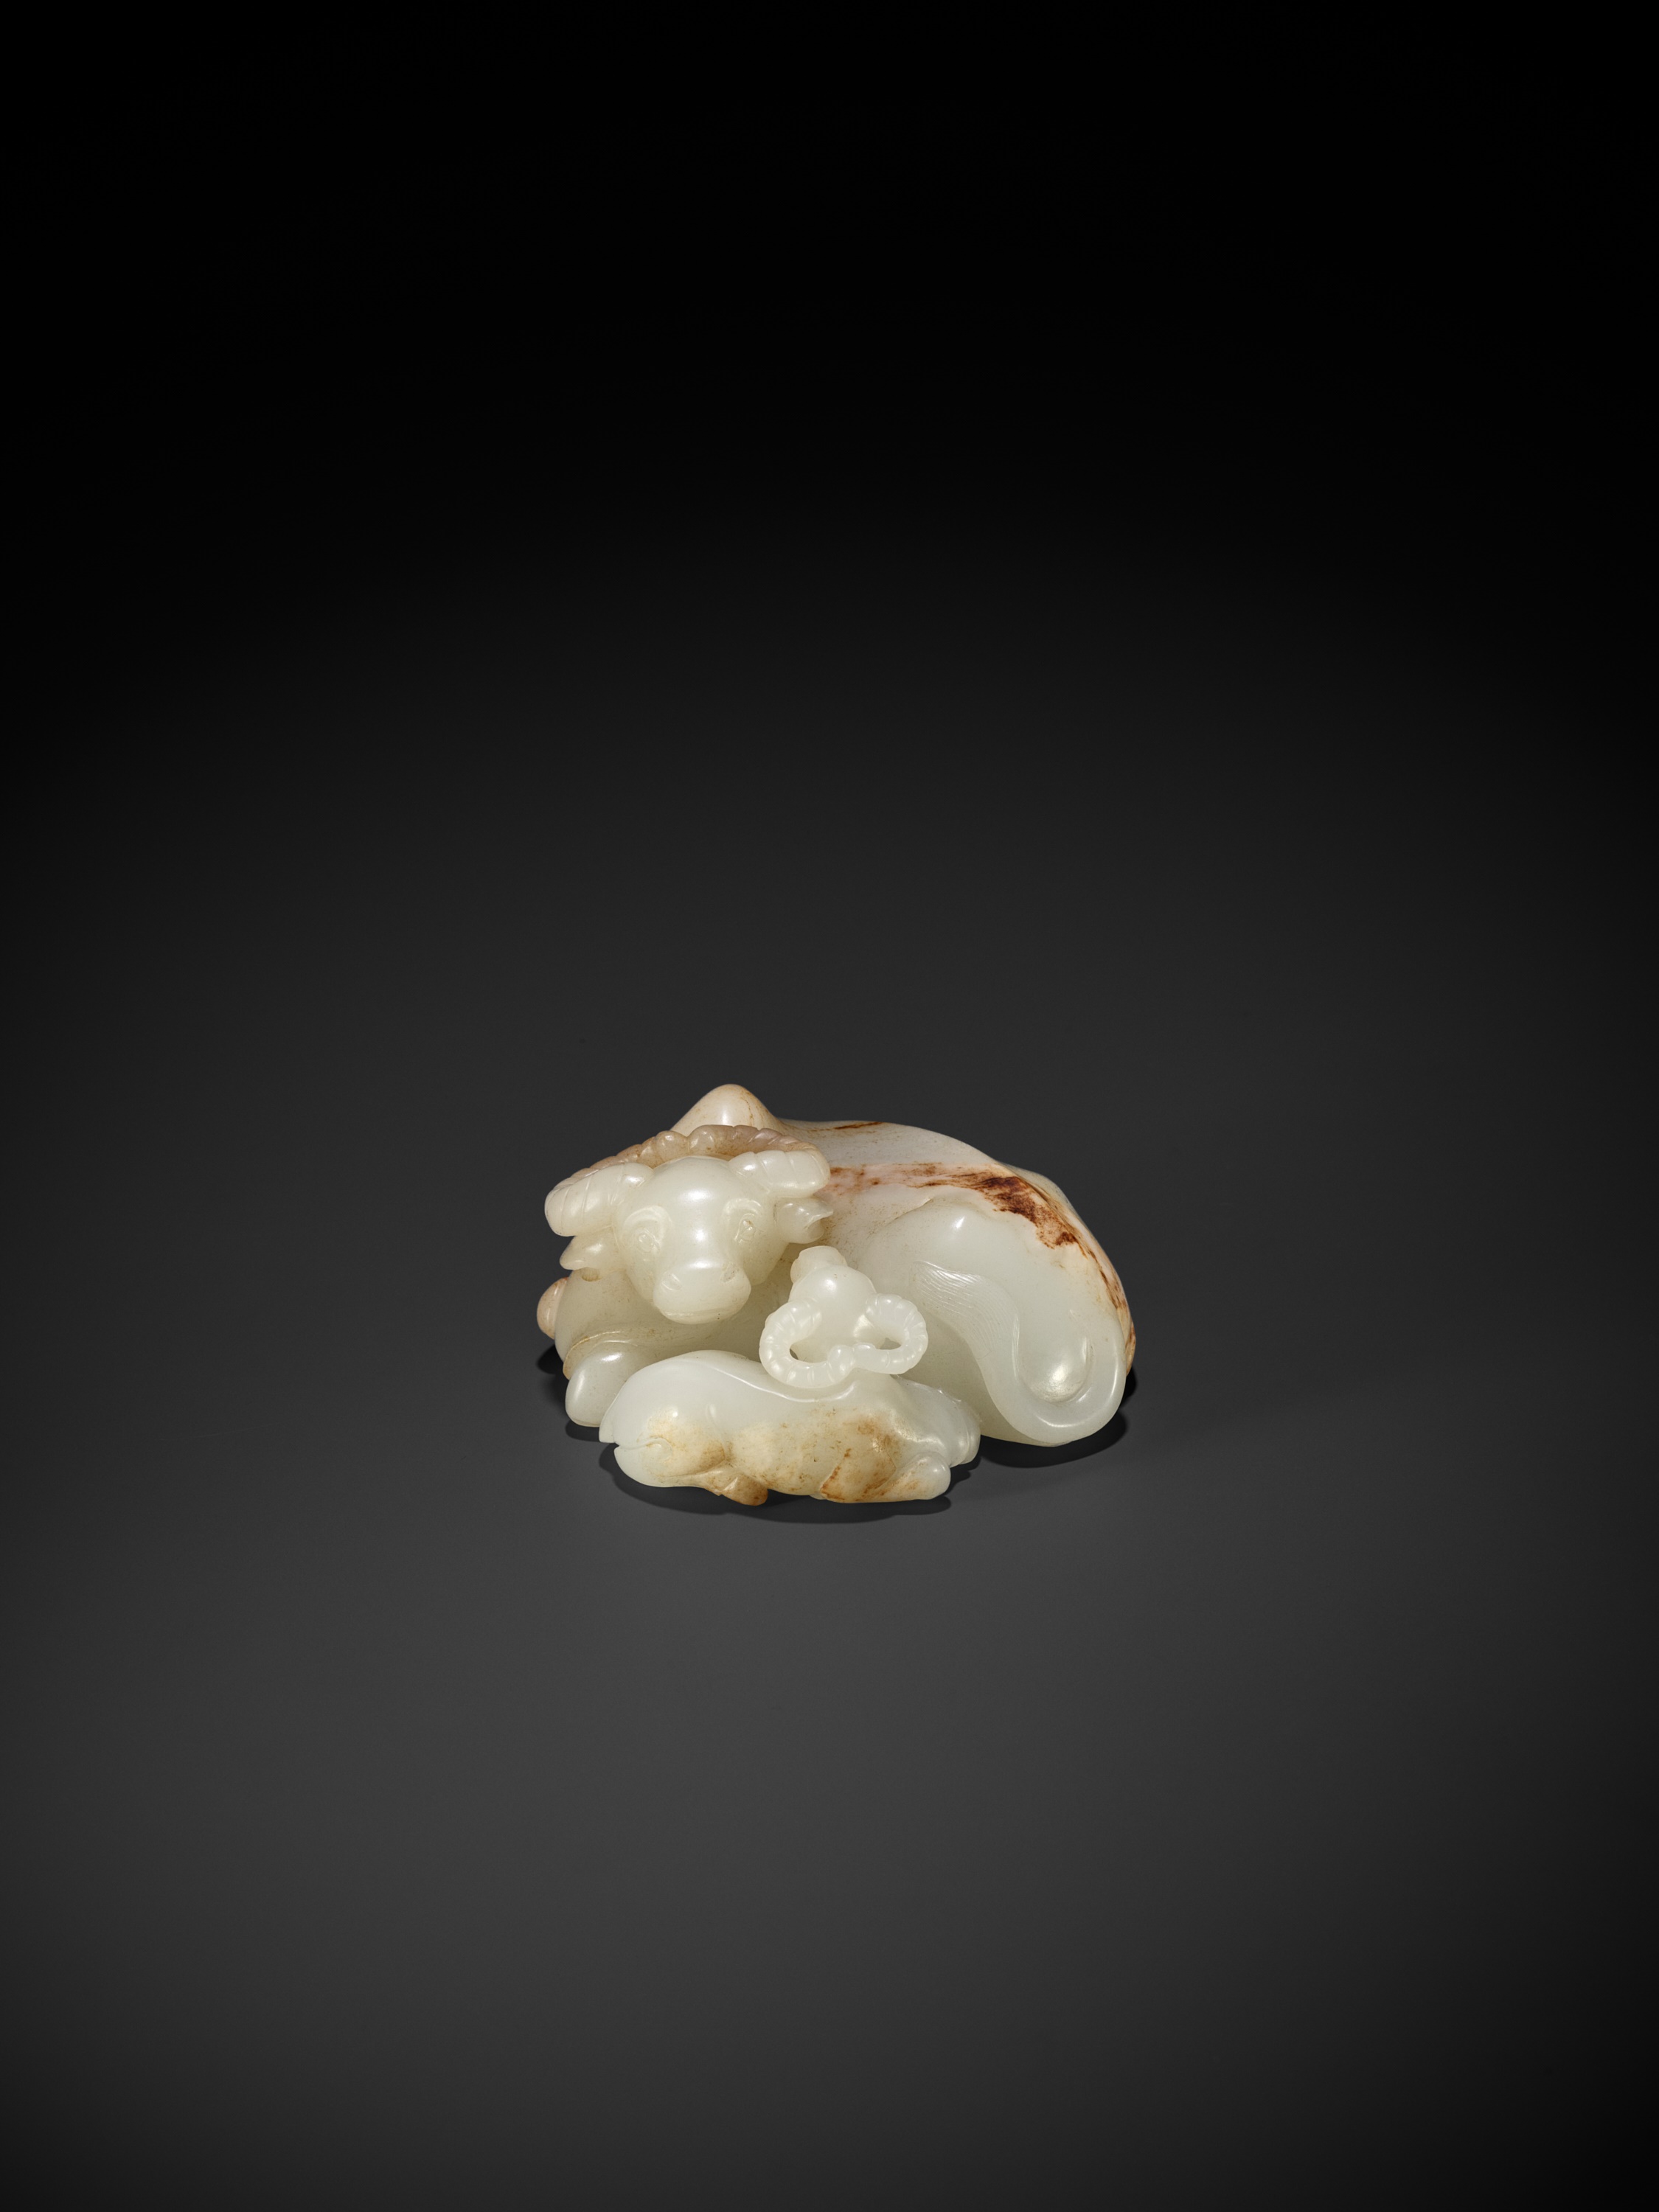 A WHITE AND RUSSET JADE GROUP OF A WATER BUFFALO AND A CALF, 18TH - 19TH CENTURY - Image 2 of 10